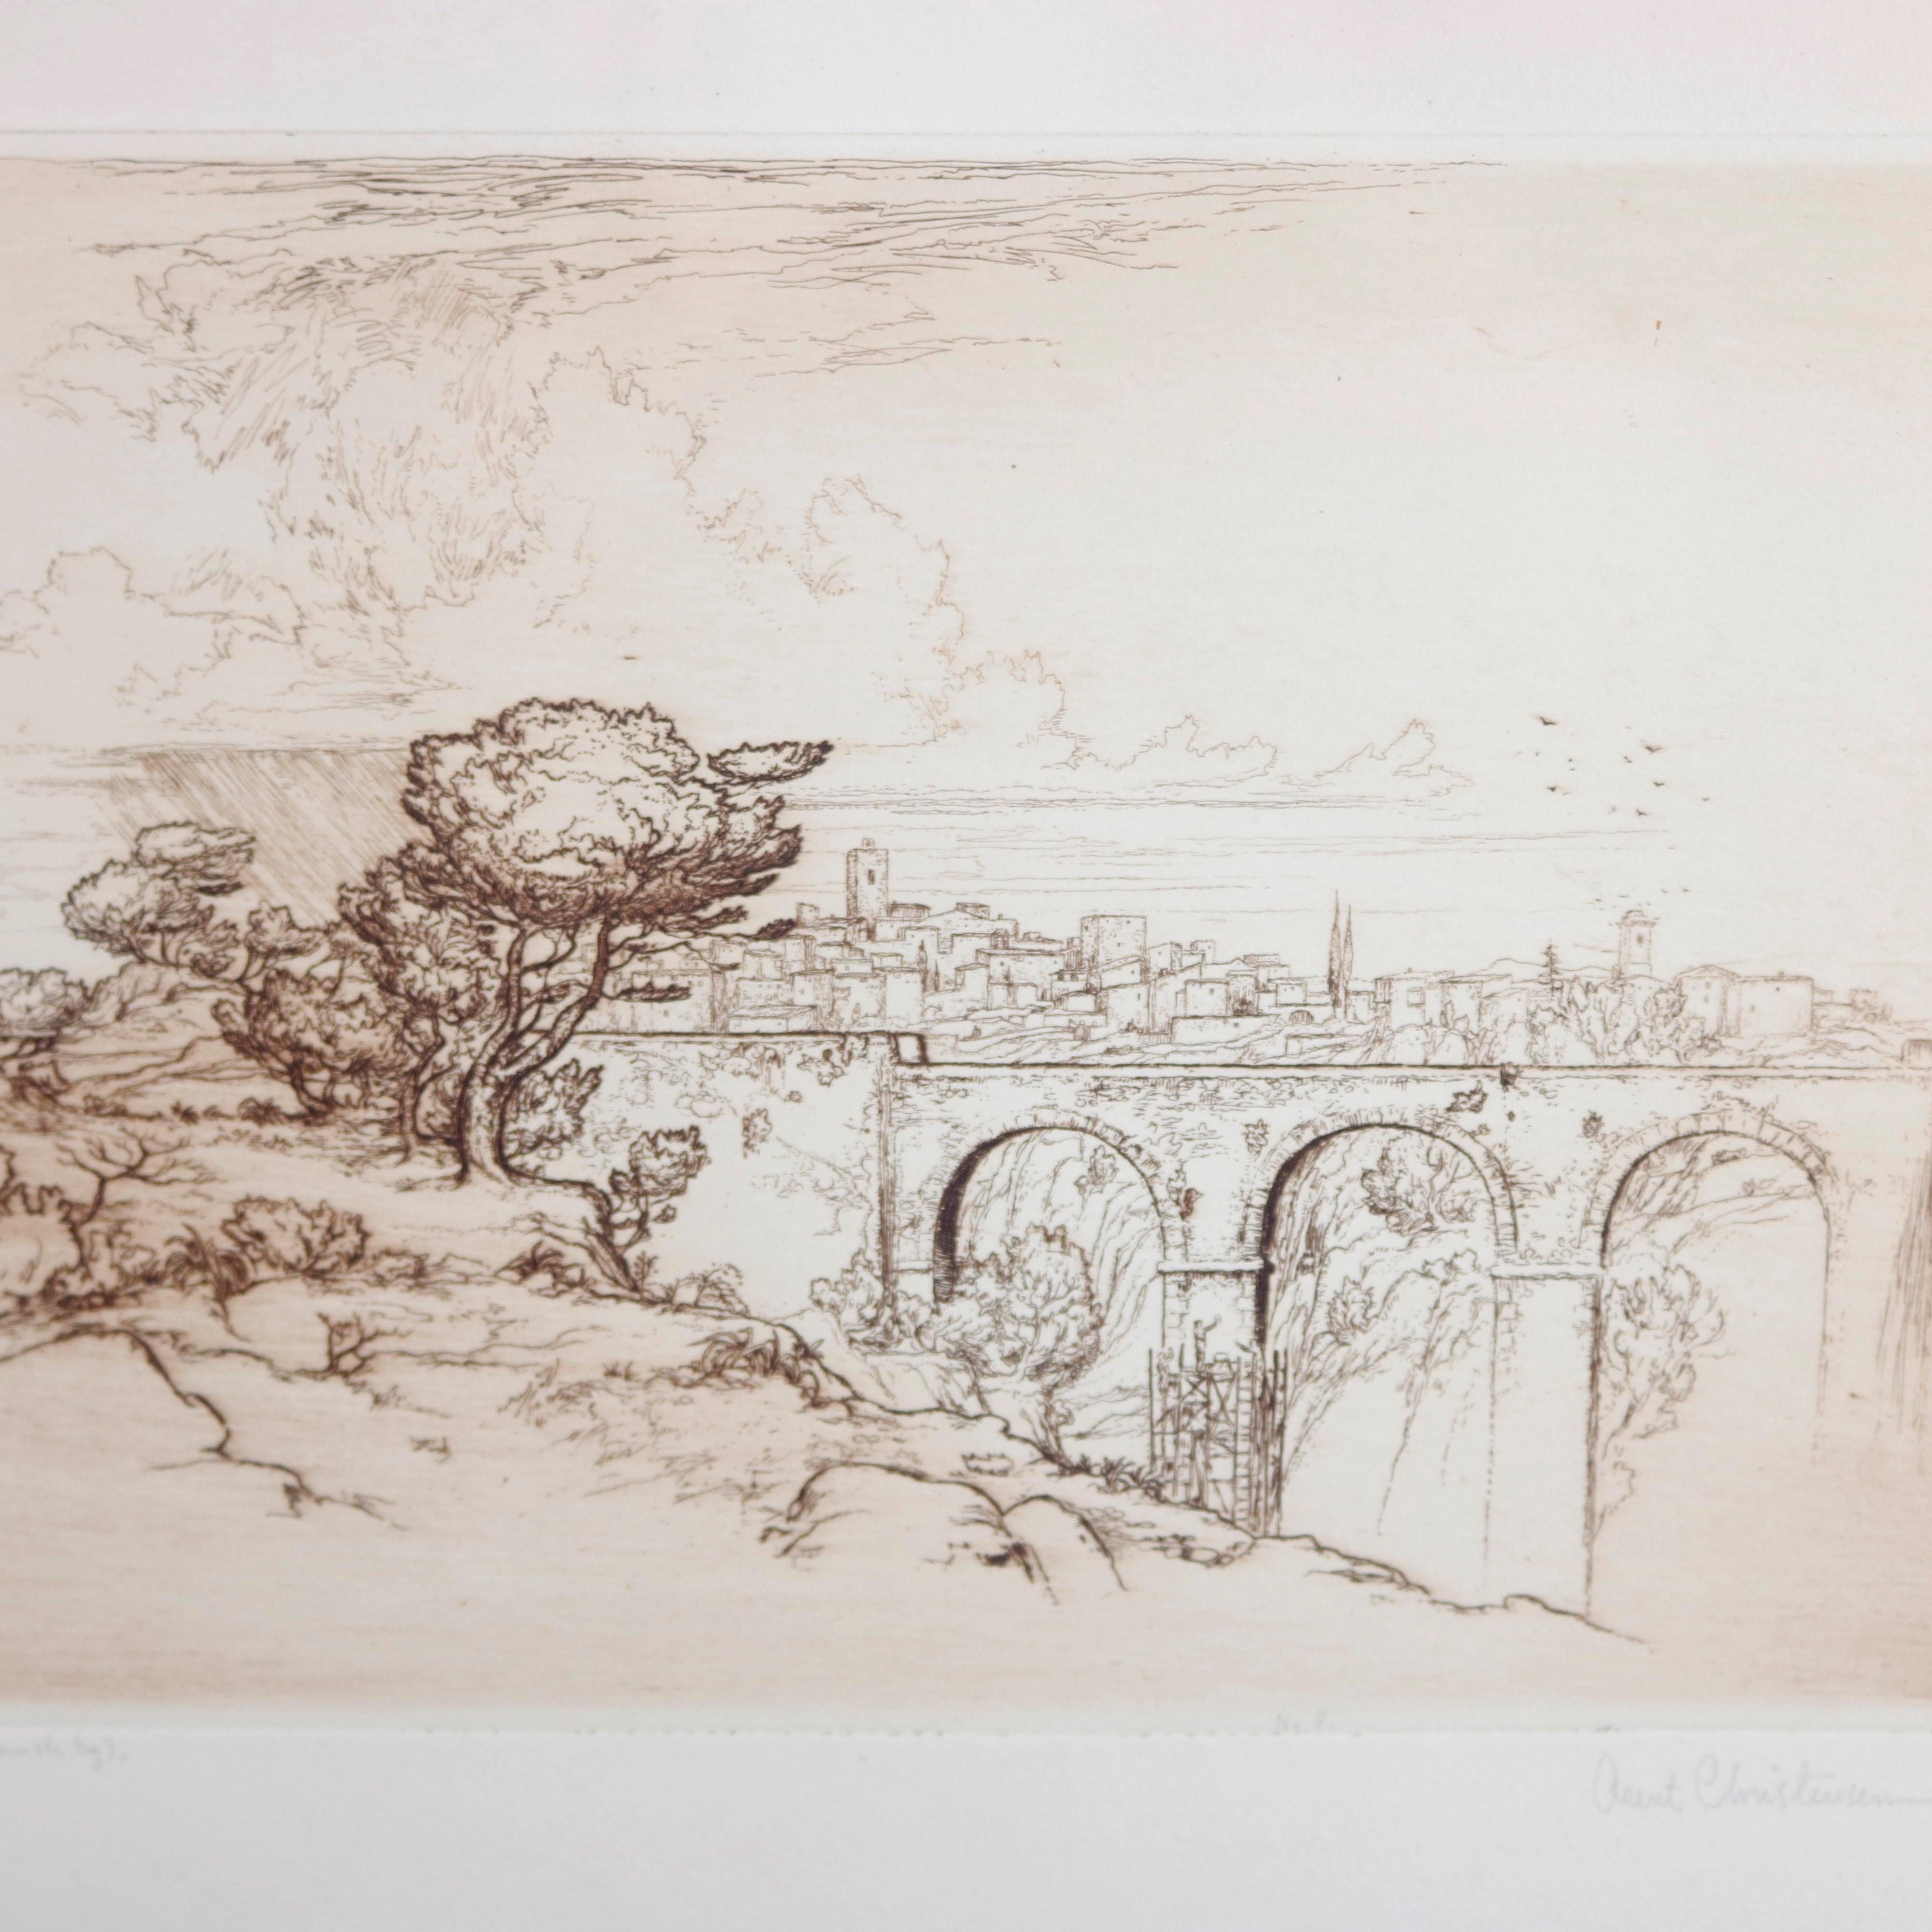 A landscape etching by Arent Christensen depicts figures working on stone bridge in river gorge setting, artist-signed as photographed, seated in tiger maple frame, 20th century


Measures: 16.5